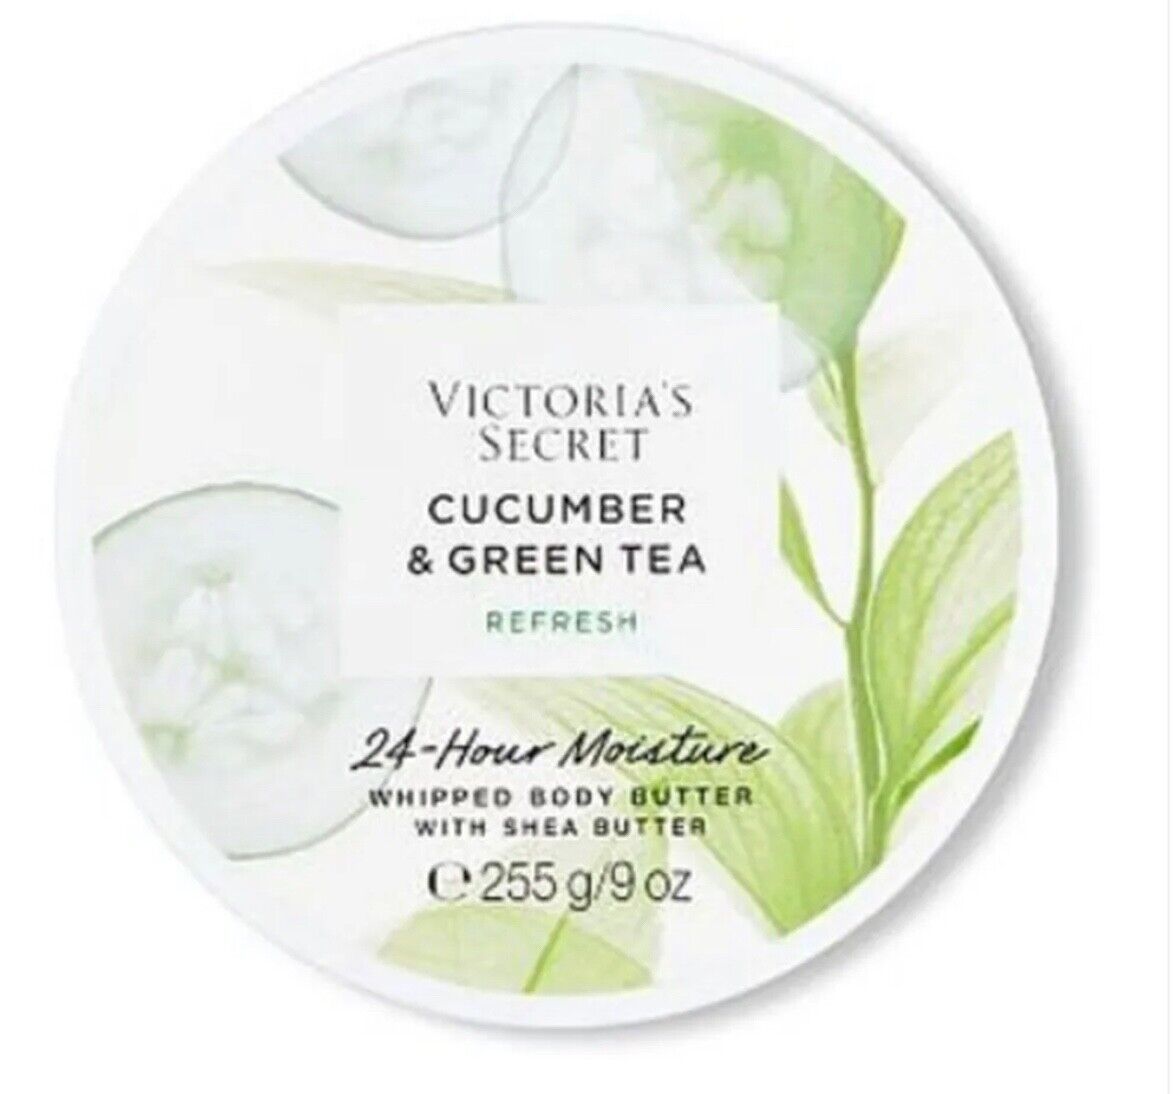 victoria's secret cucumber & green tea whipped body butter 9 oz free shipping